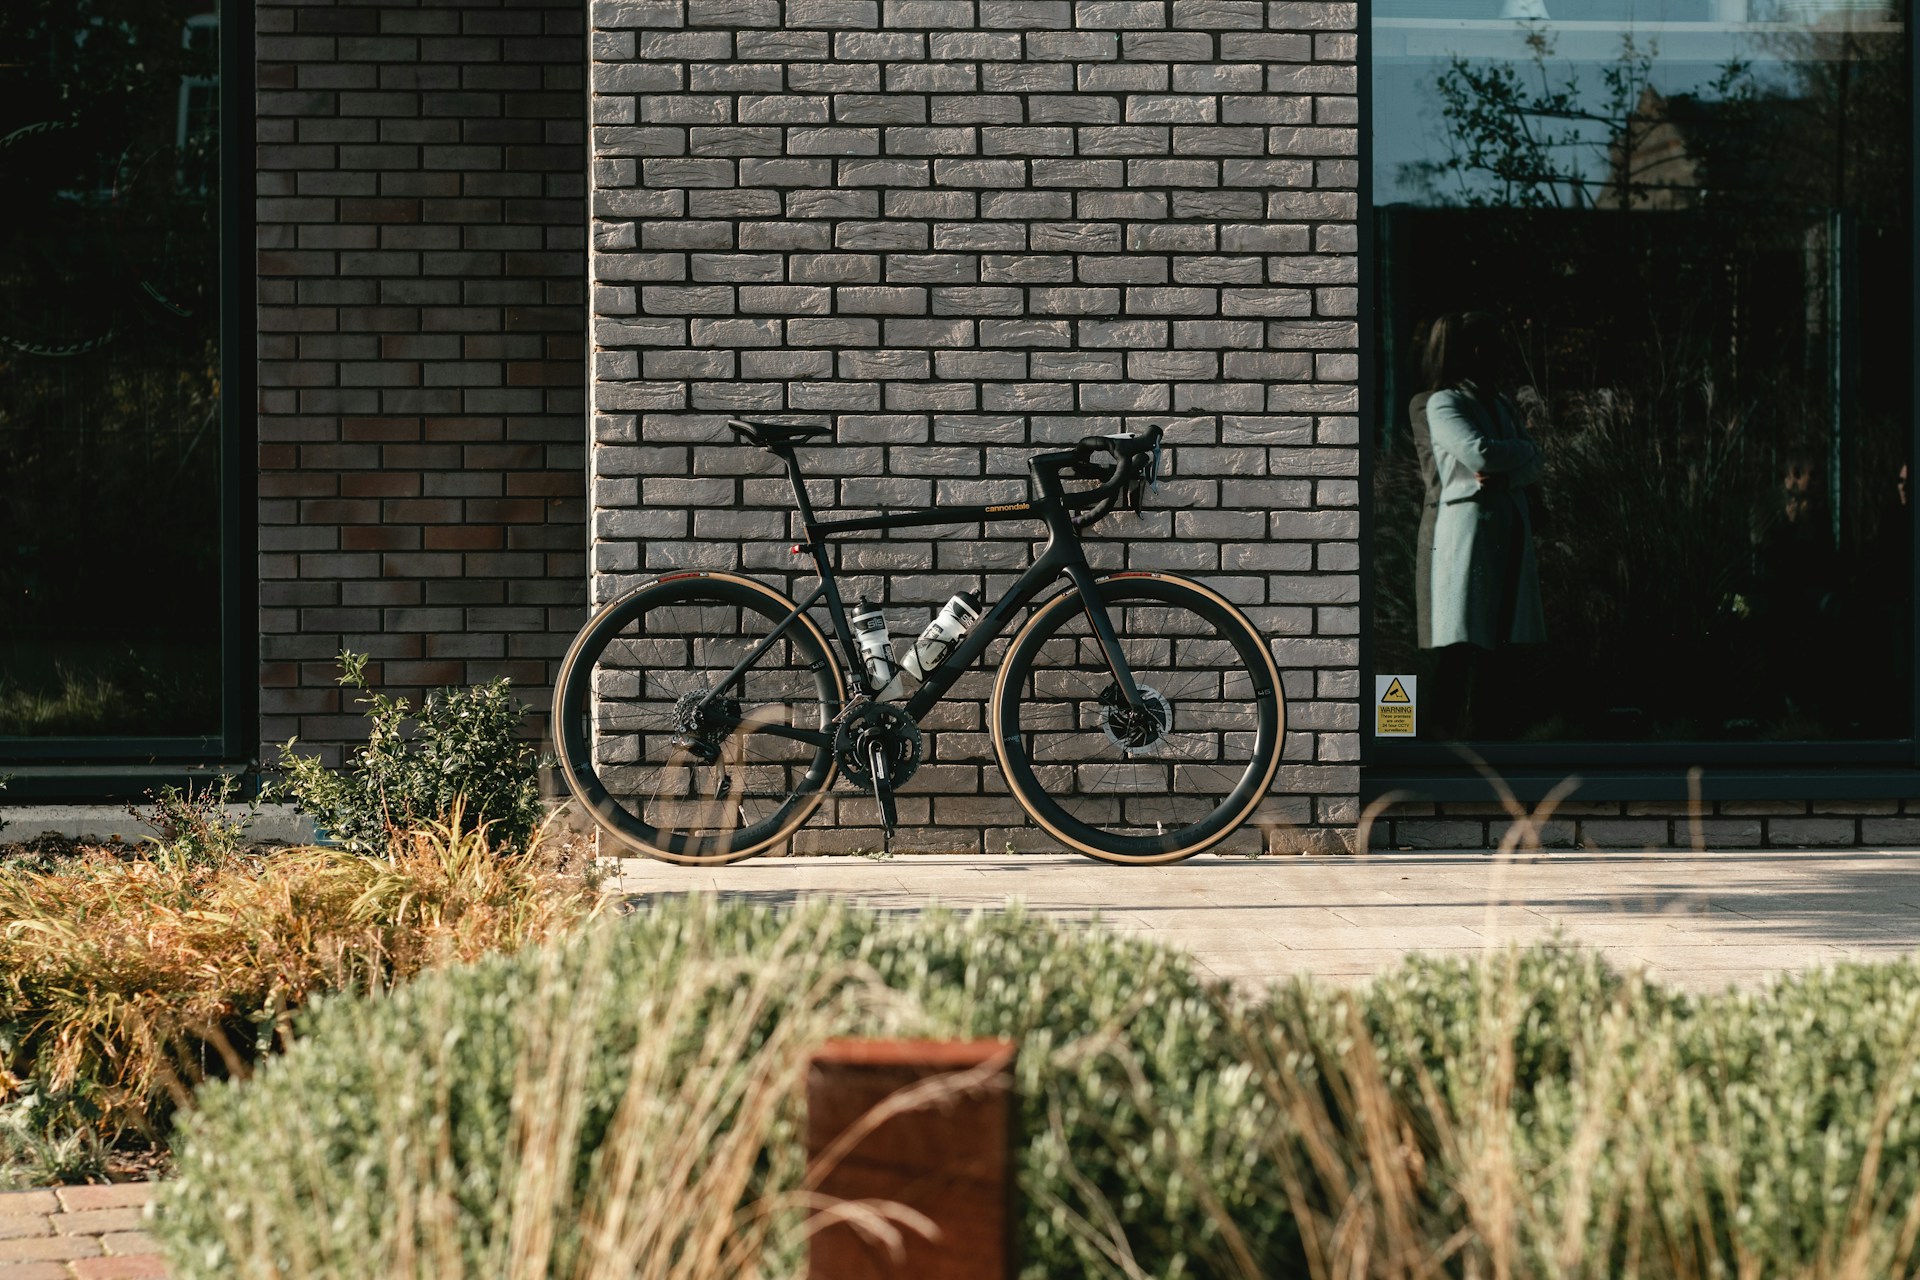 A bicycle propped up against wall with some grass and plants in the foreground